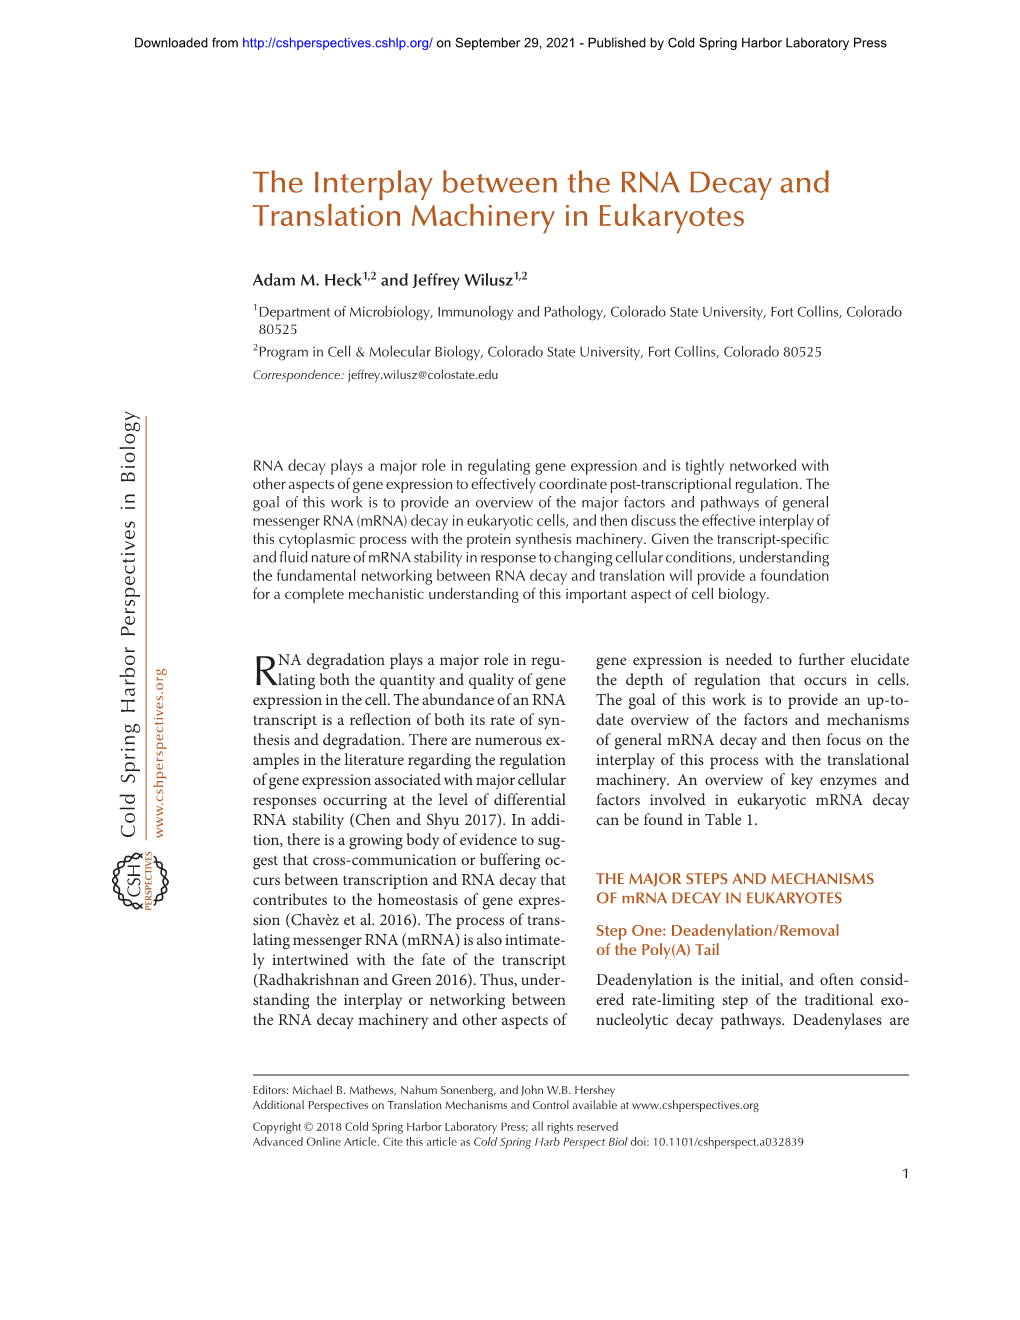 The Interplay Between the RNA Decay and Translation Machinery in Eukaryotes